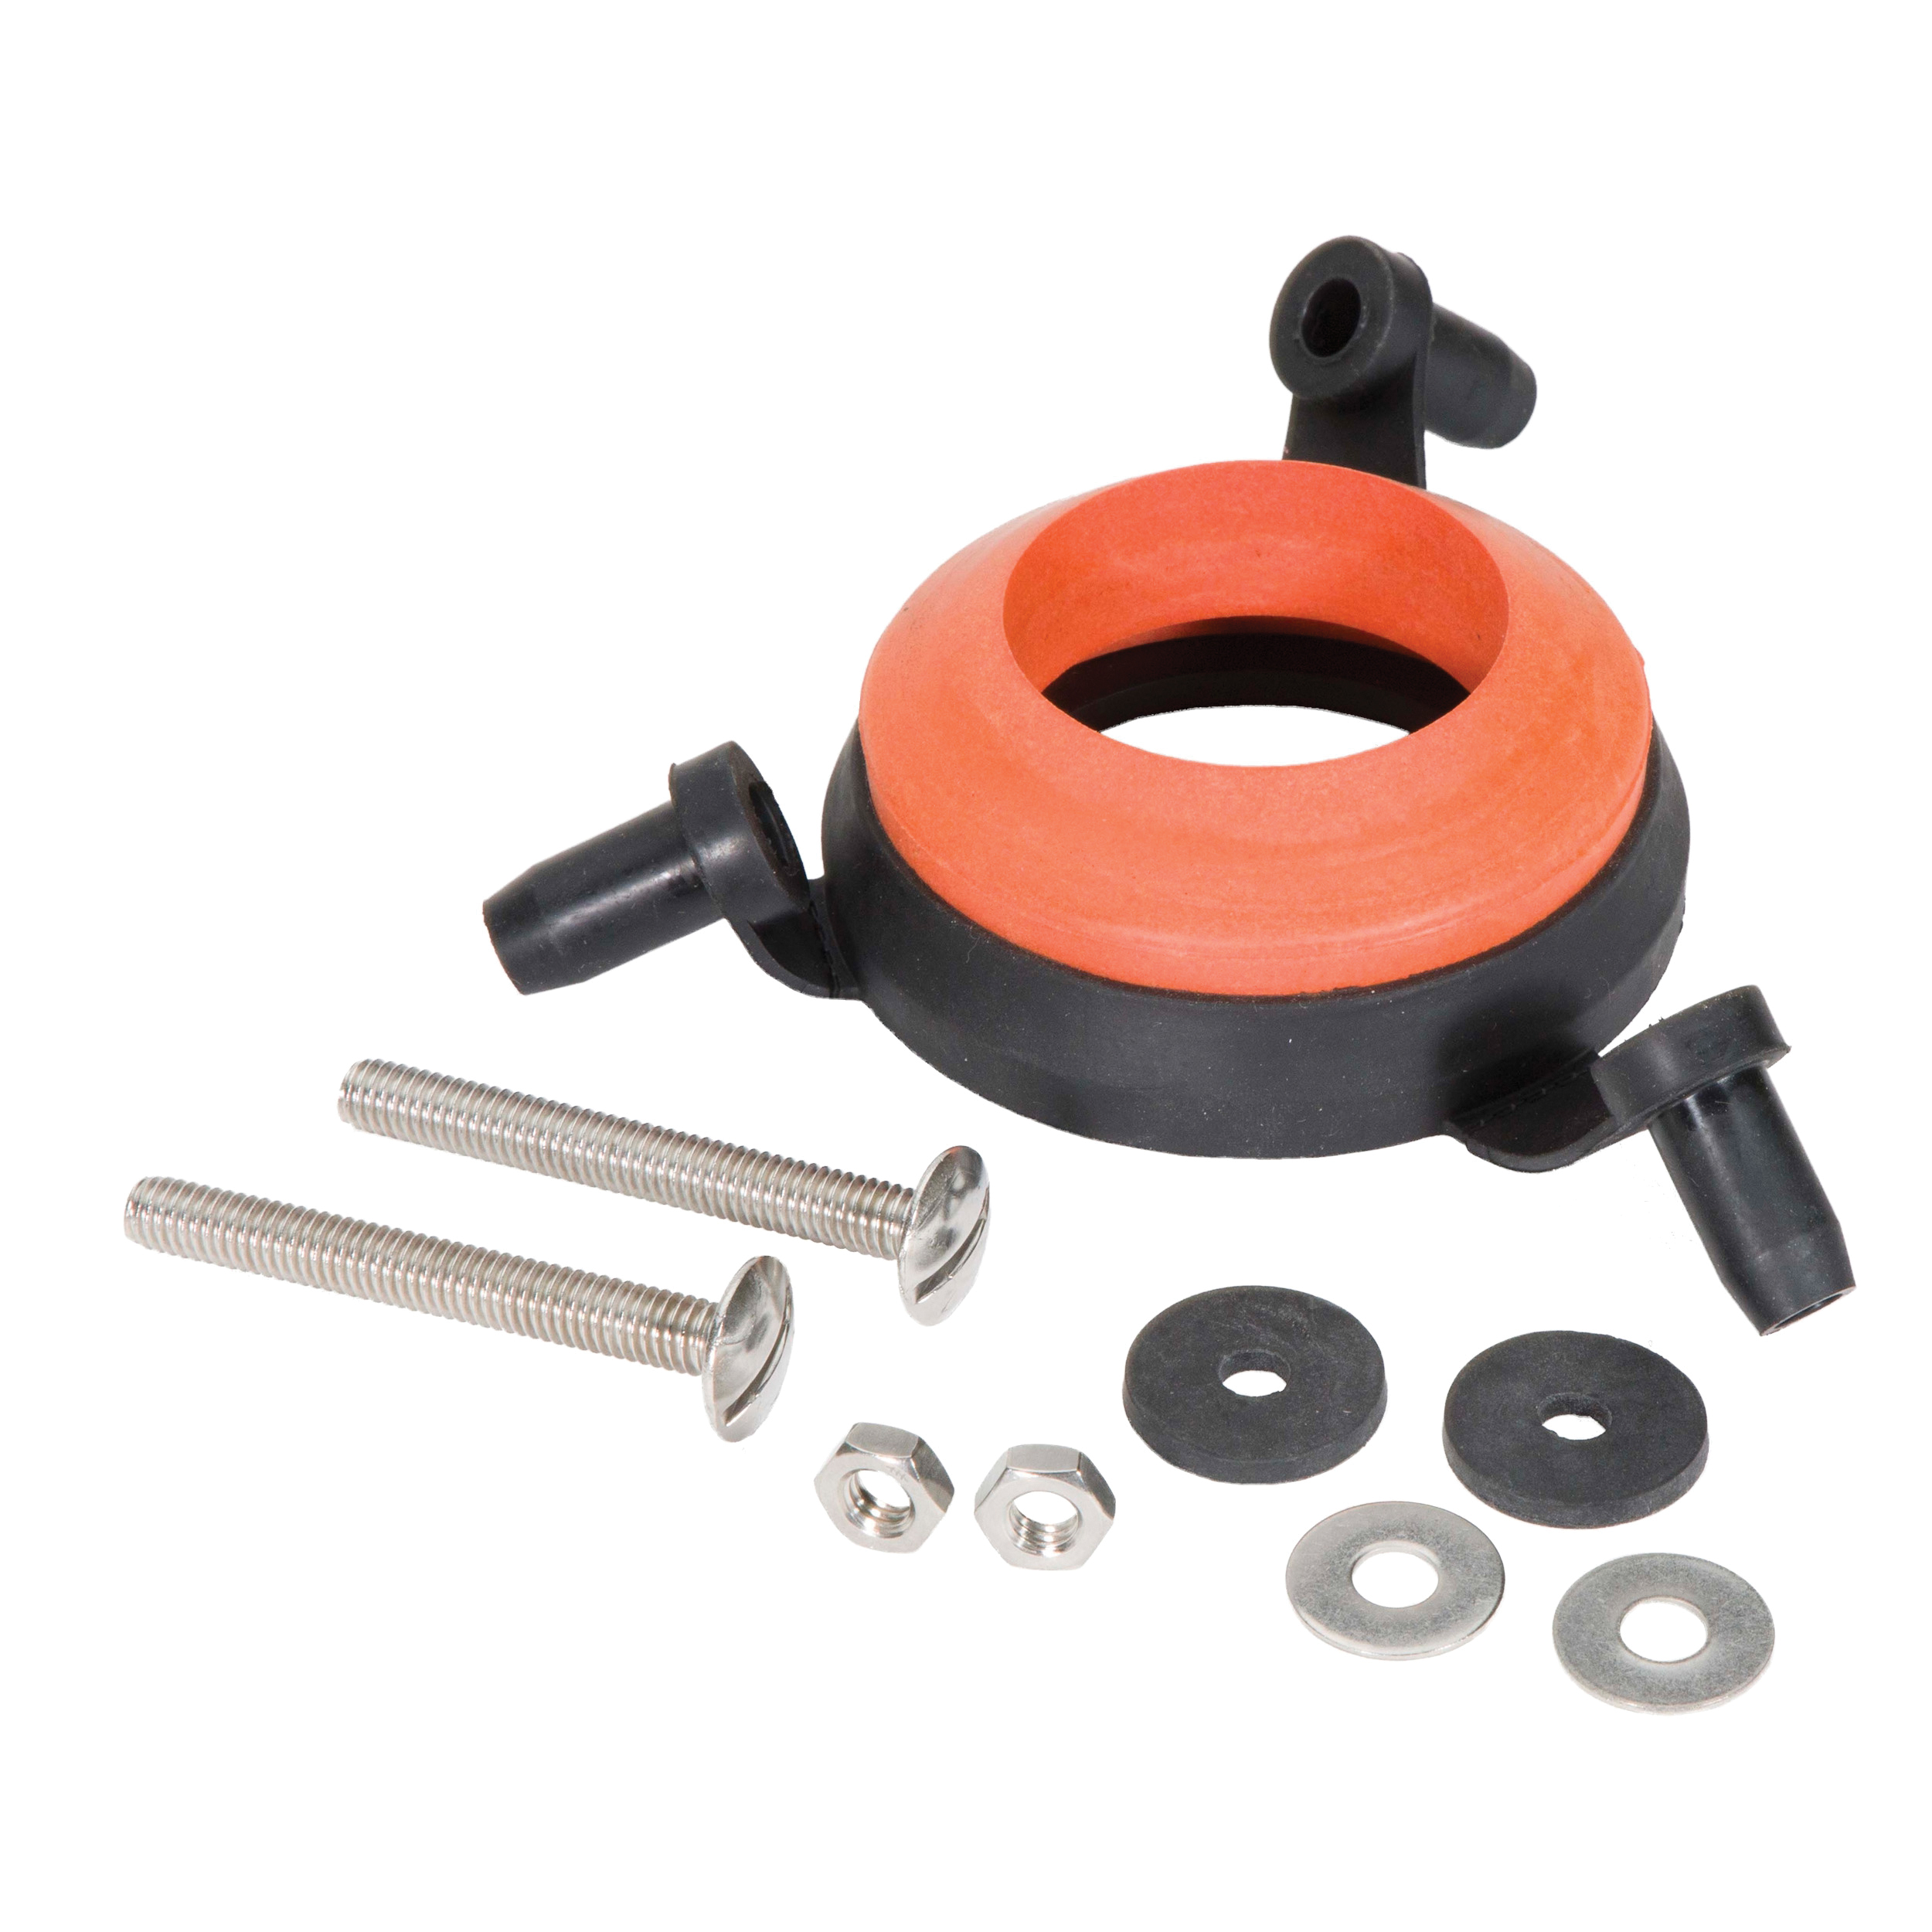 2602G-008-P10 Universal Tank-to-Bowl Gasket System, 2 in Dia, Rubber/Stainless Steel, Black/Red